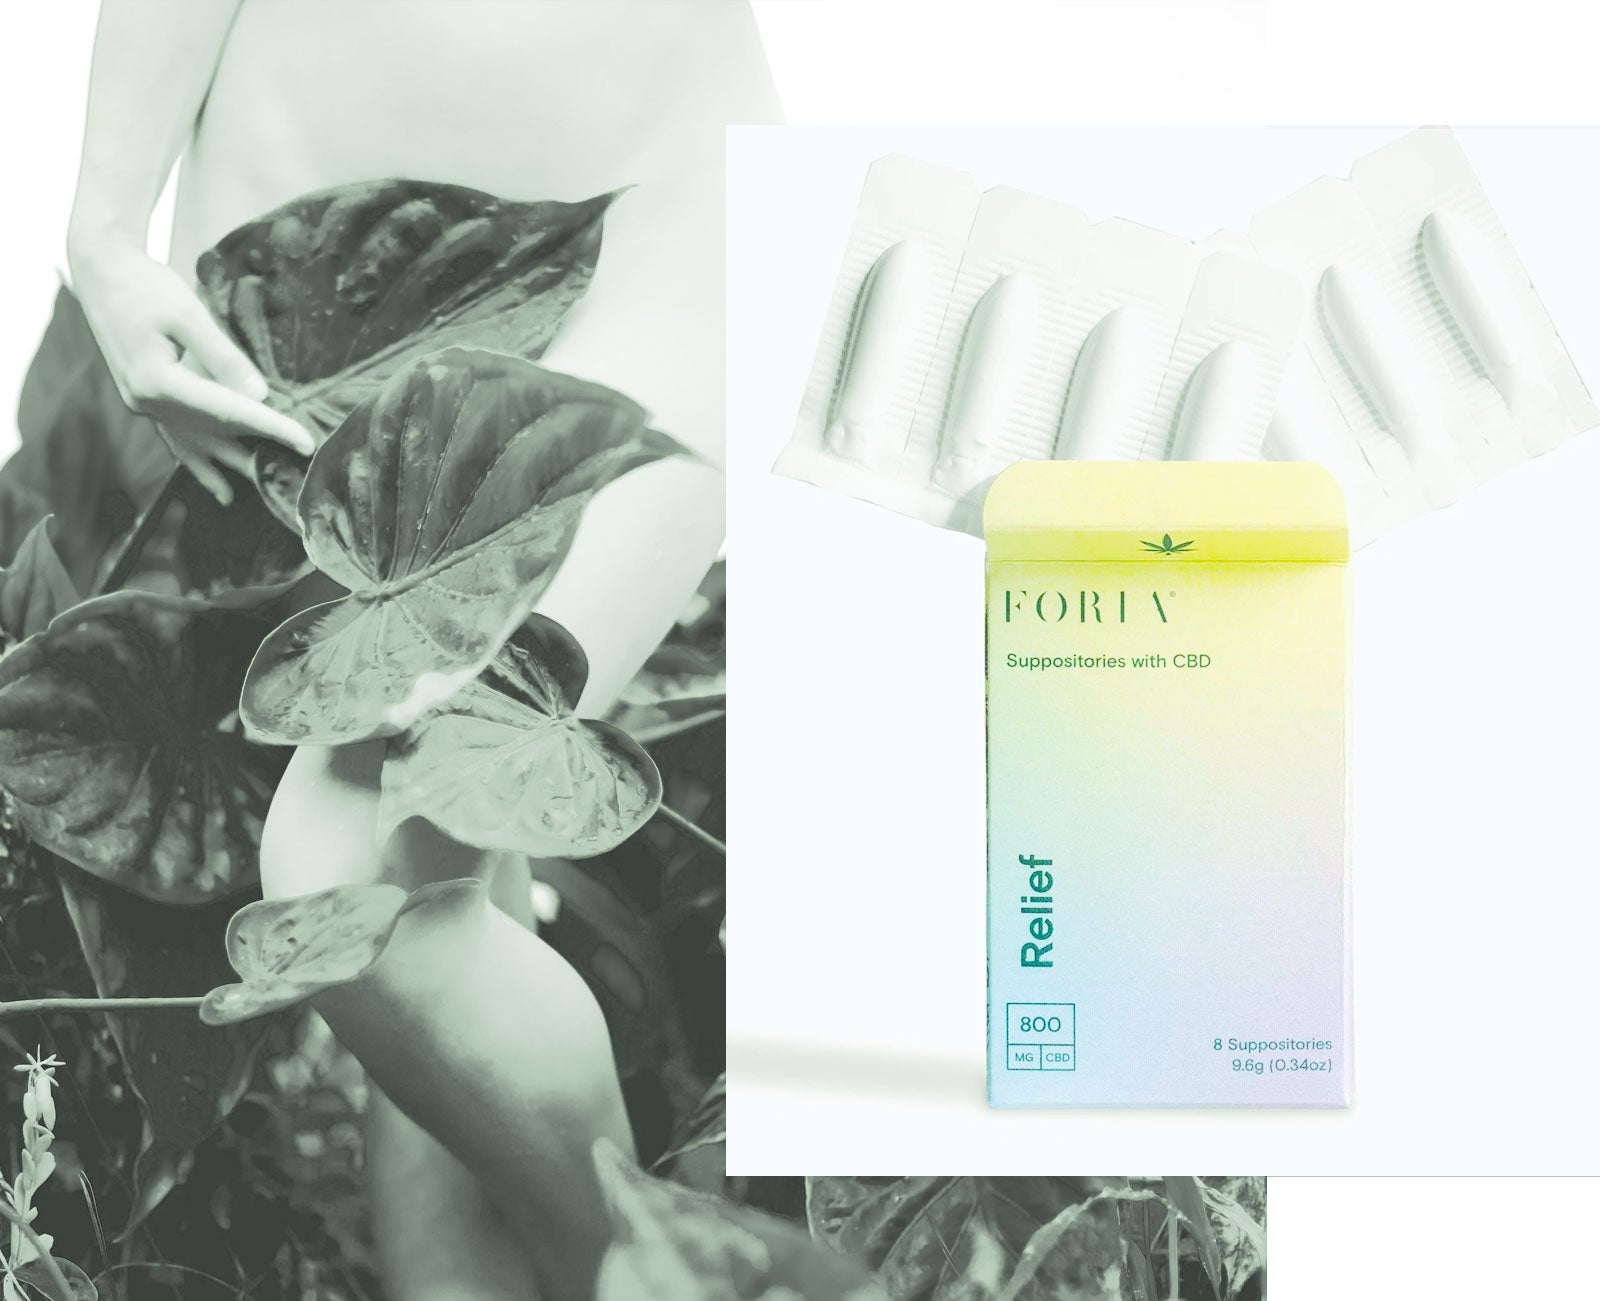 CBD Suppositories for Endometriosis Relief by Foria